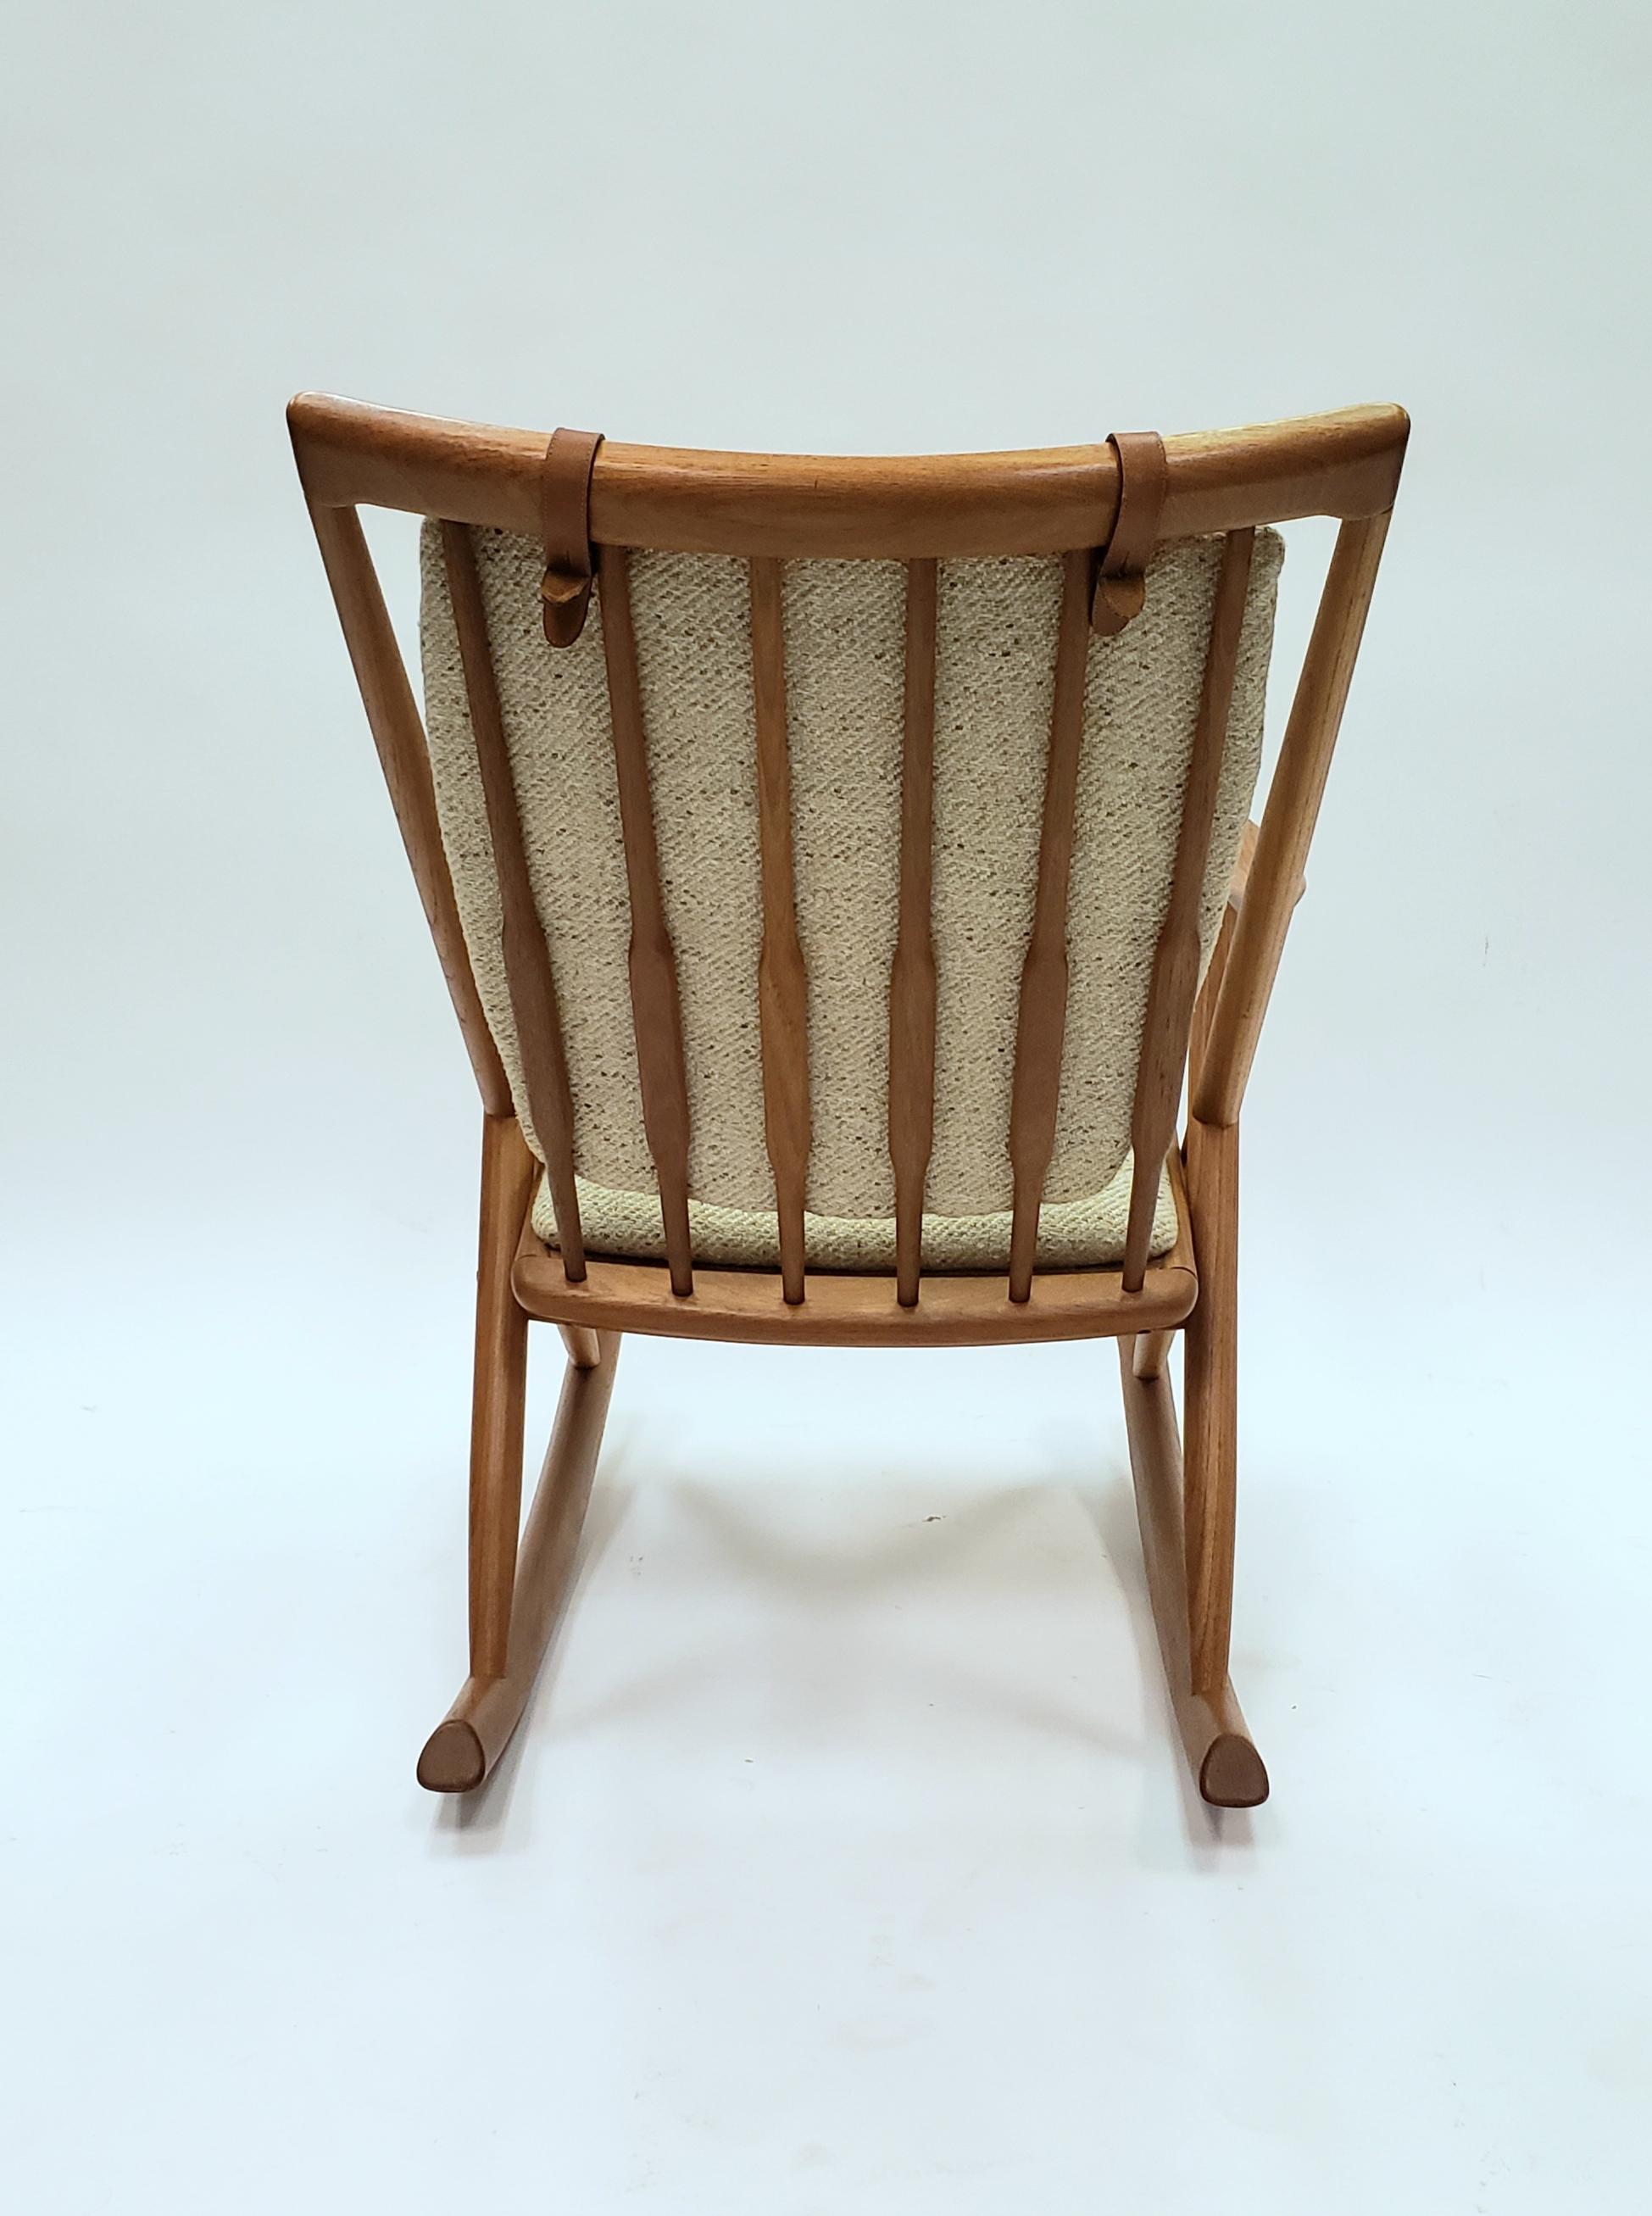 Lovely and comfortable Danish rocker made from teak. This rocker is attributed to Frank Reenskaug fir Brahmin but had no label. The wool seat is comfortable and attached with distinctive leather straps. The sculptural base gives it a distinct style.